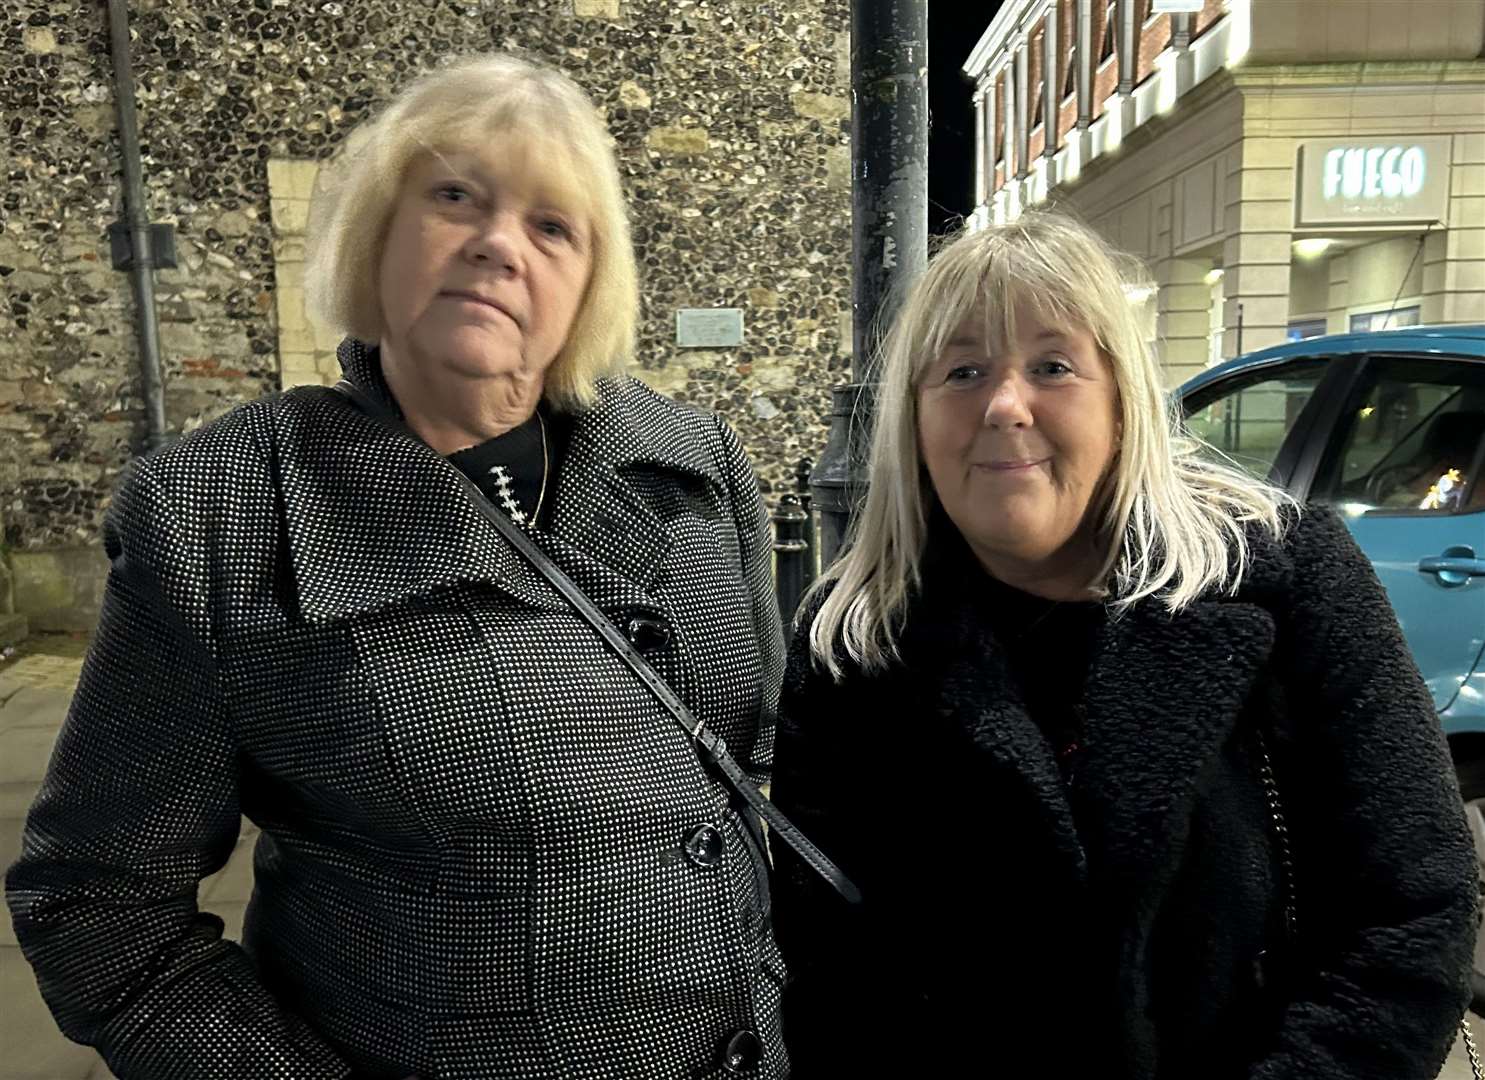 Jo Horn, 59, and Julie Barton, 60, do not feel safe in the city